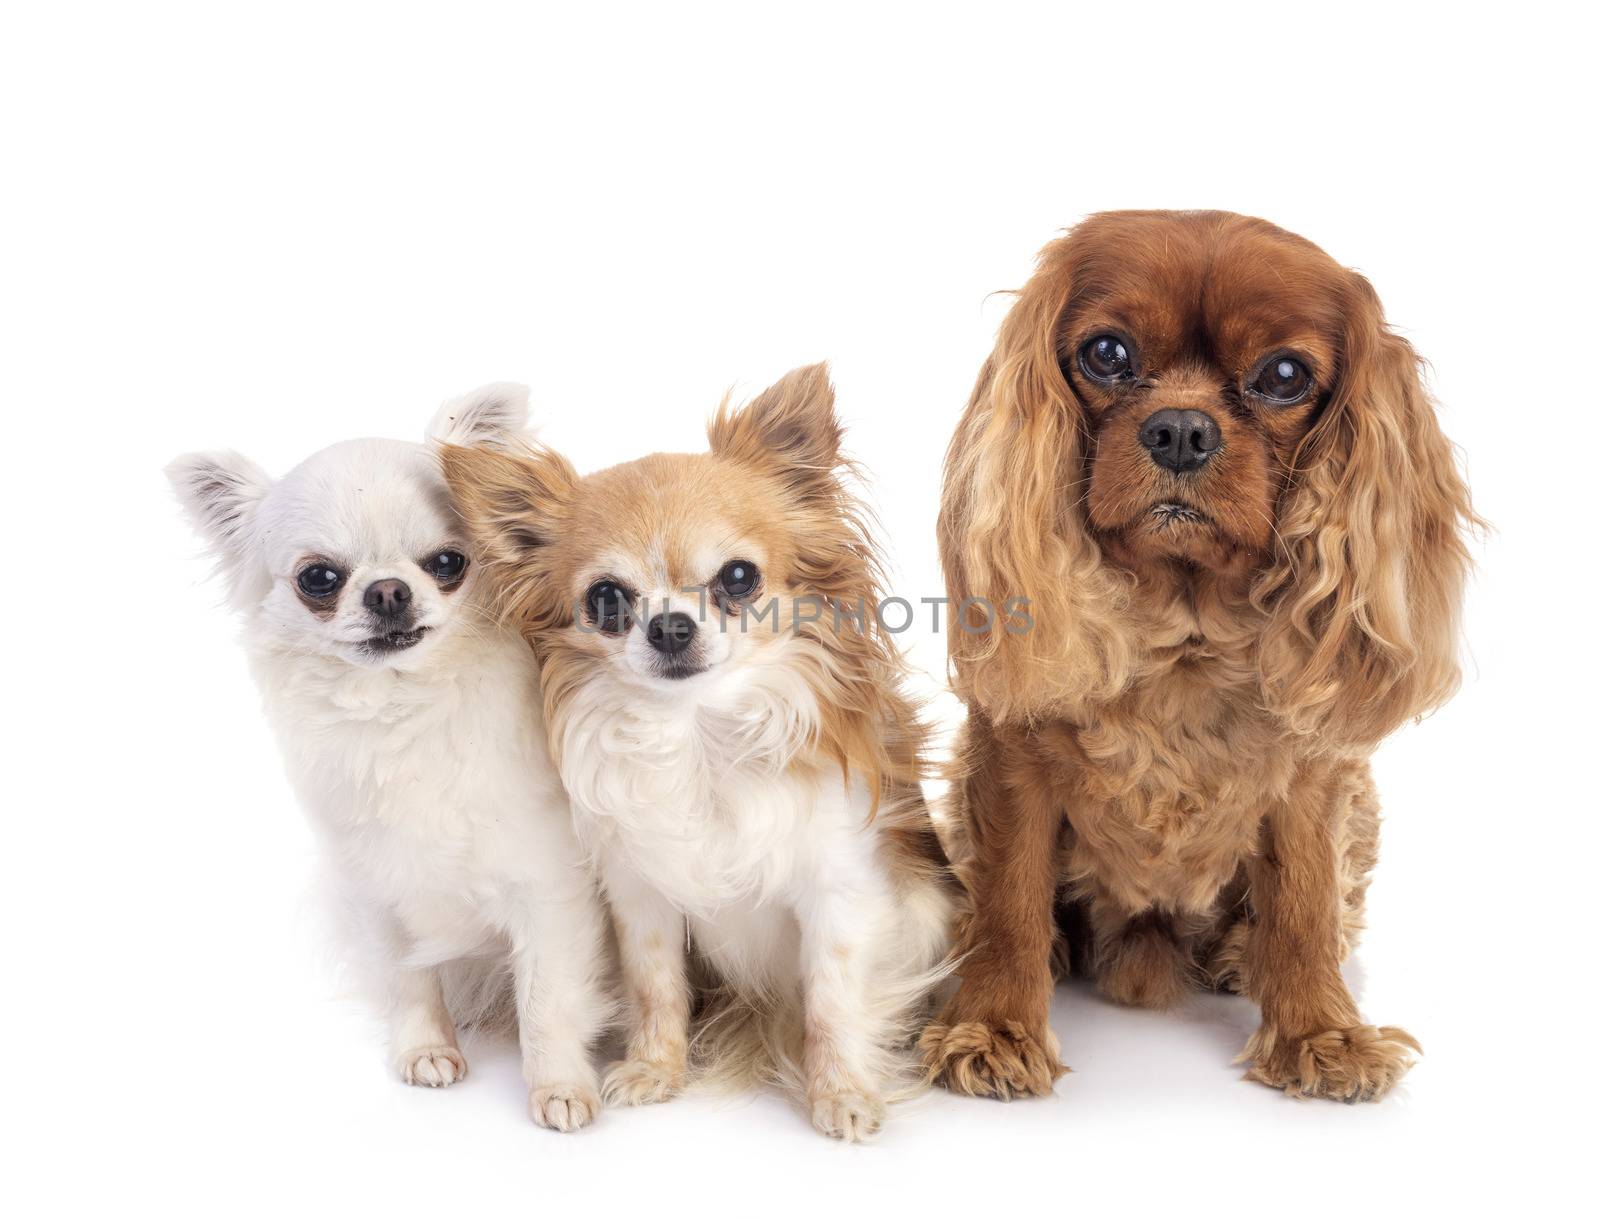 cavalier king charles and chihuahuas  in front of white background